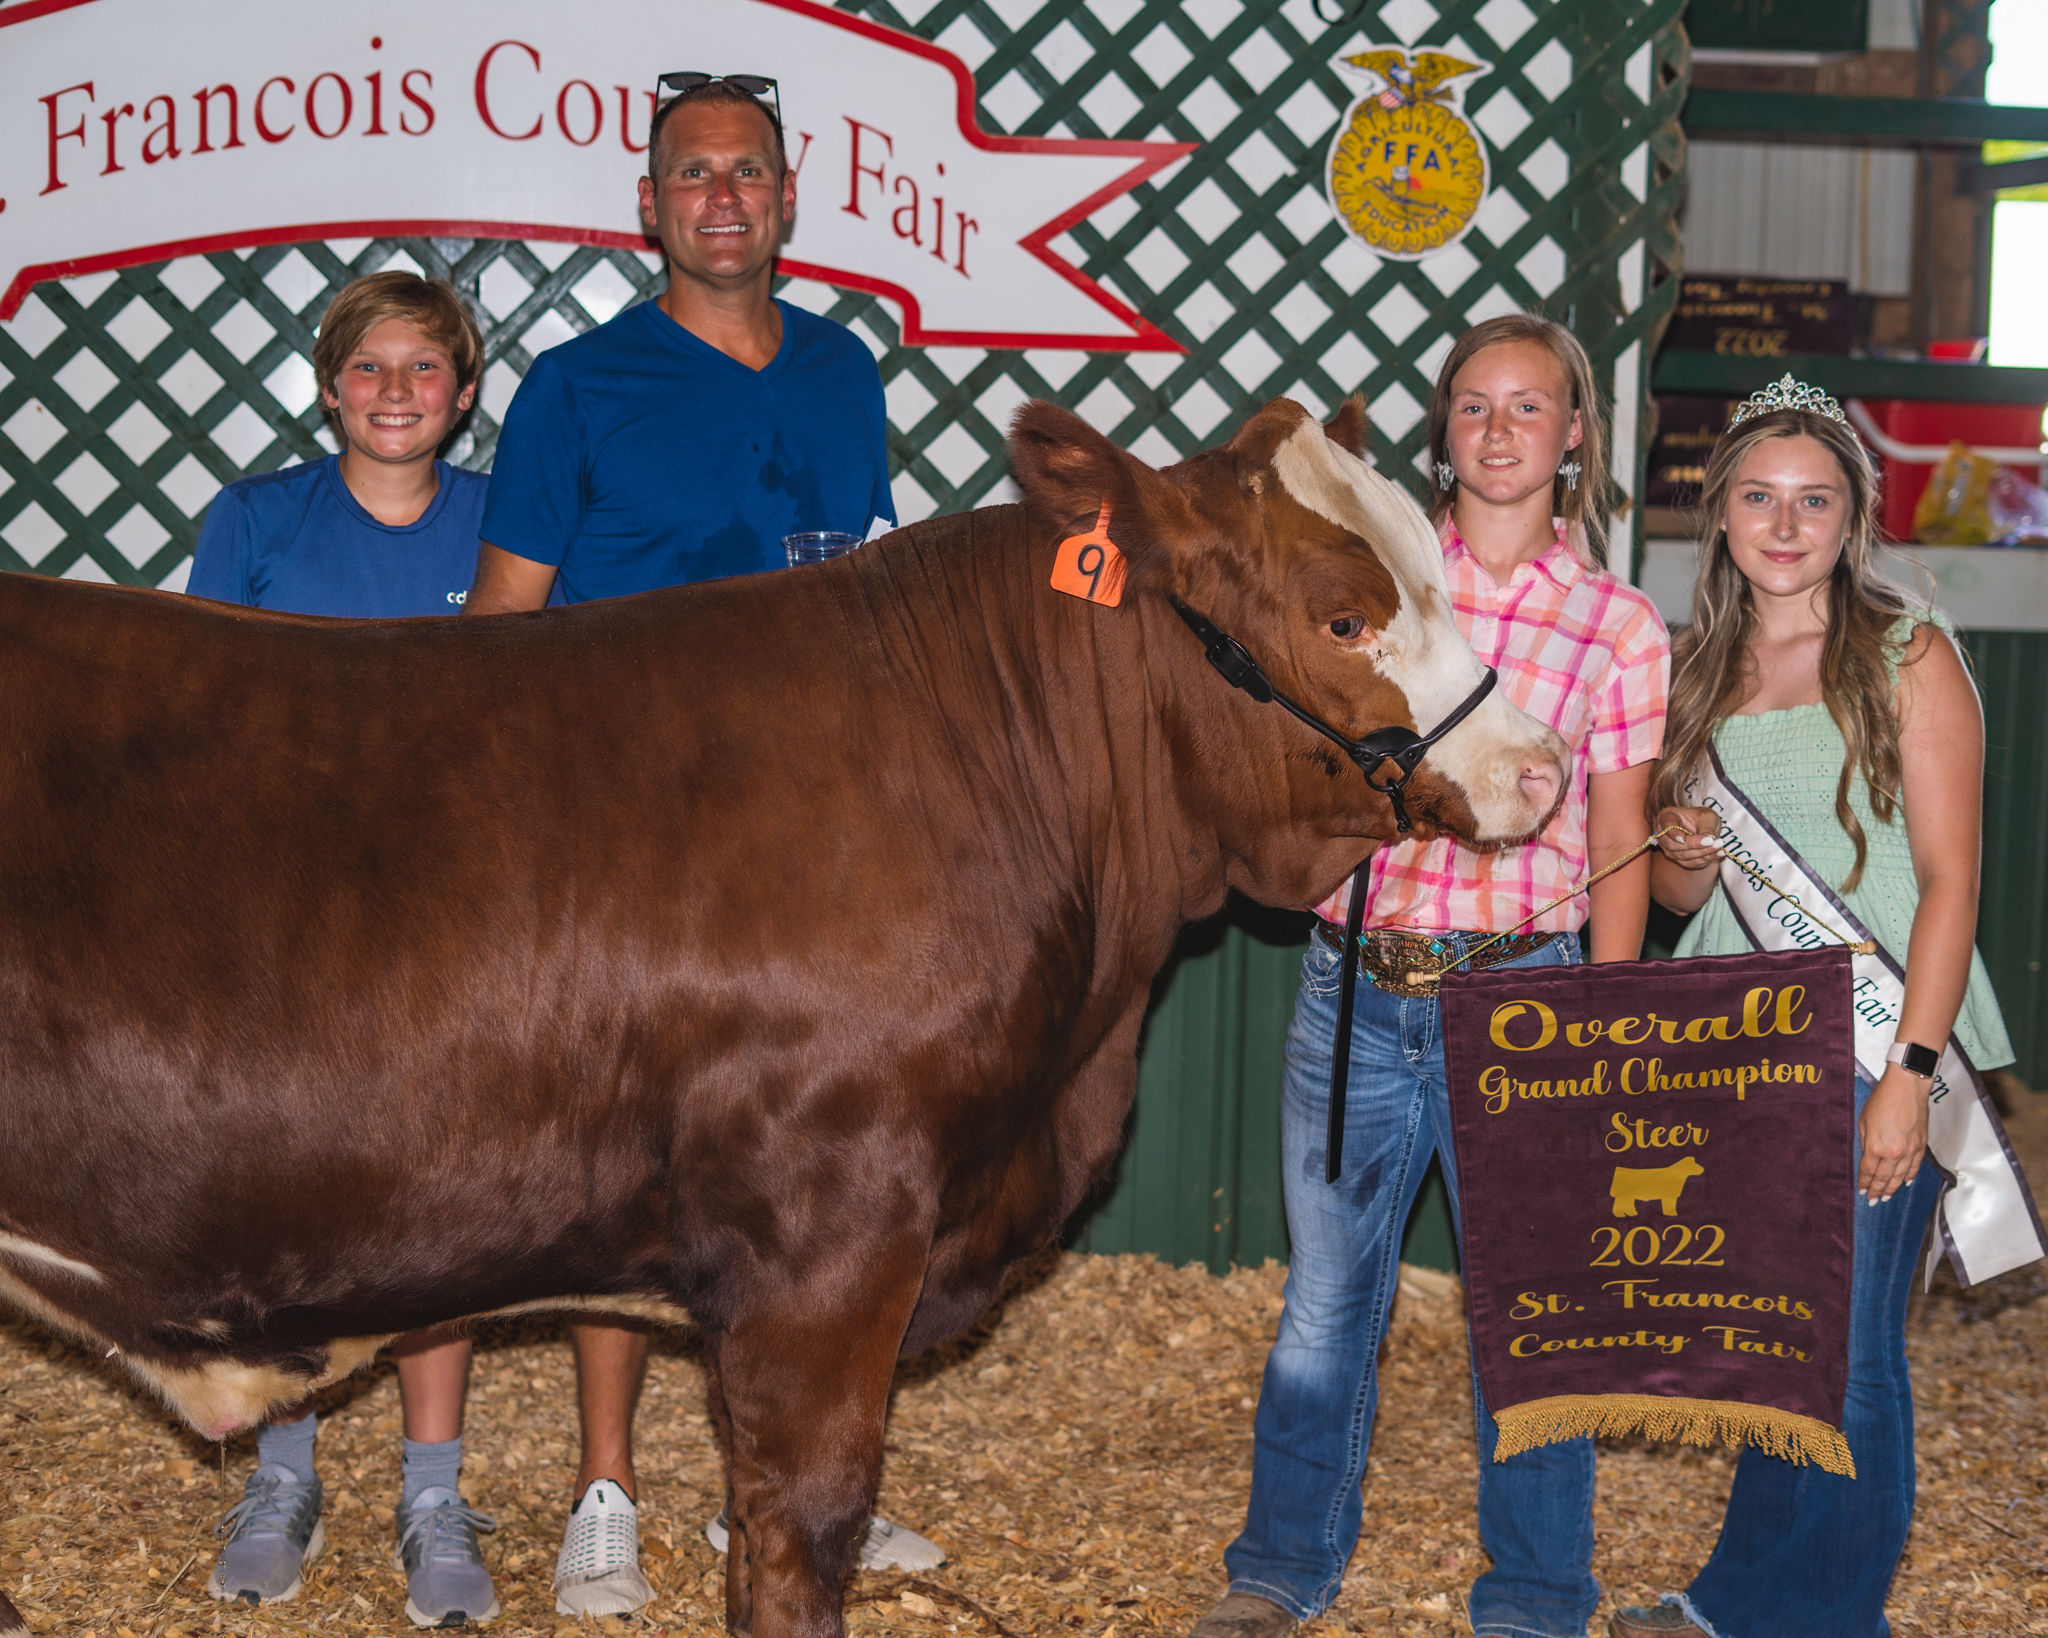 Molly Peterson receiving the Overall Grand Champion Steer 2022 reward